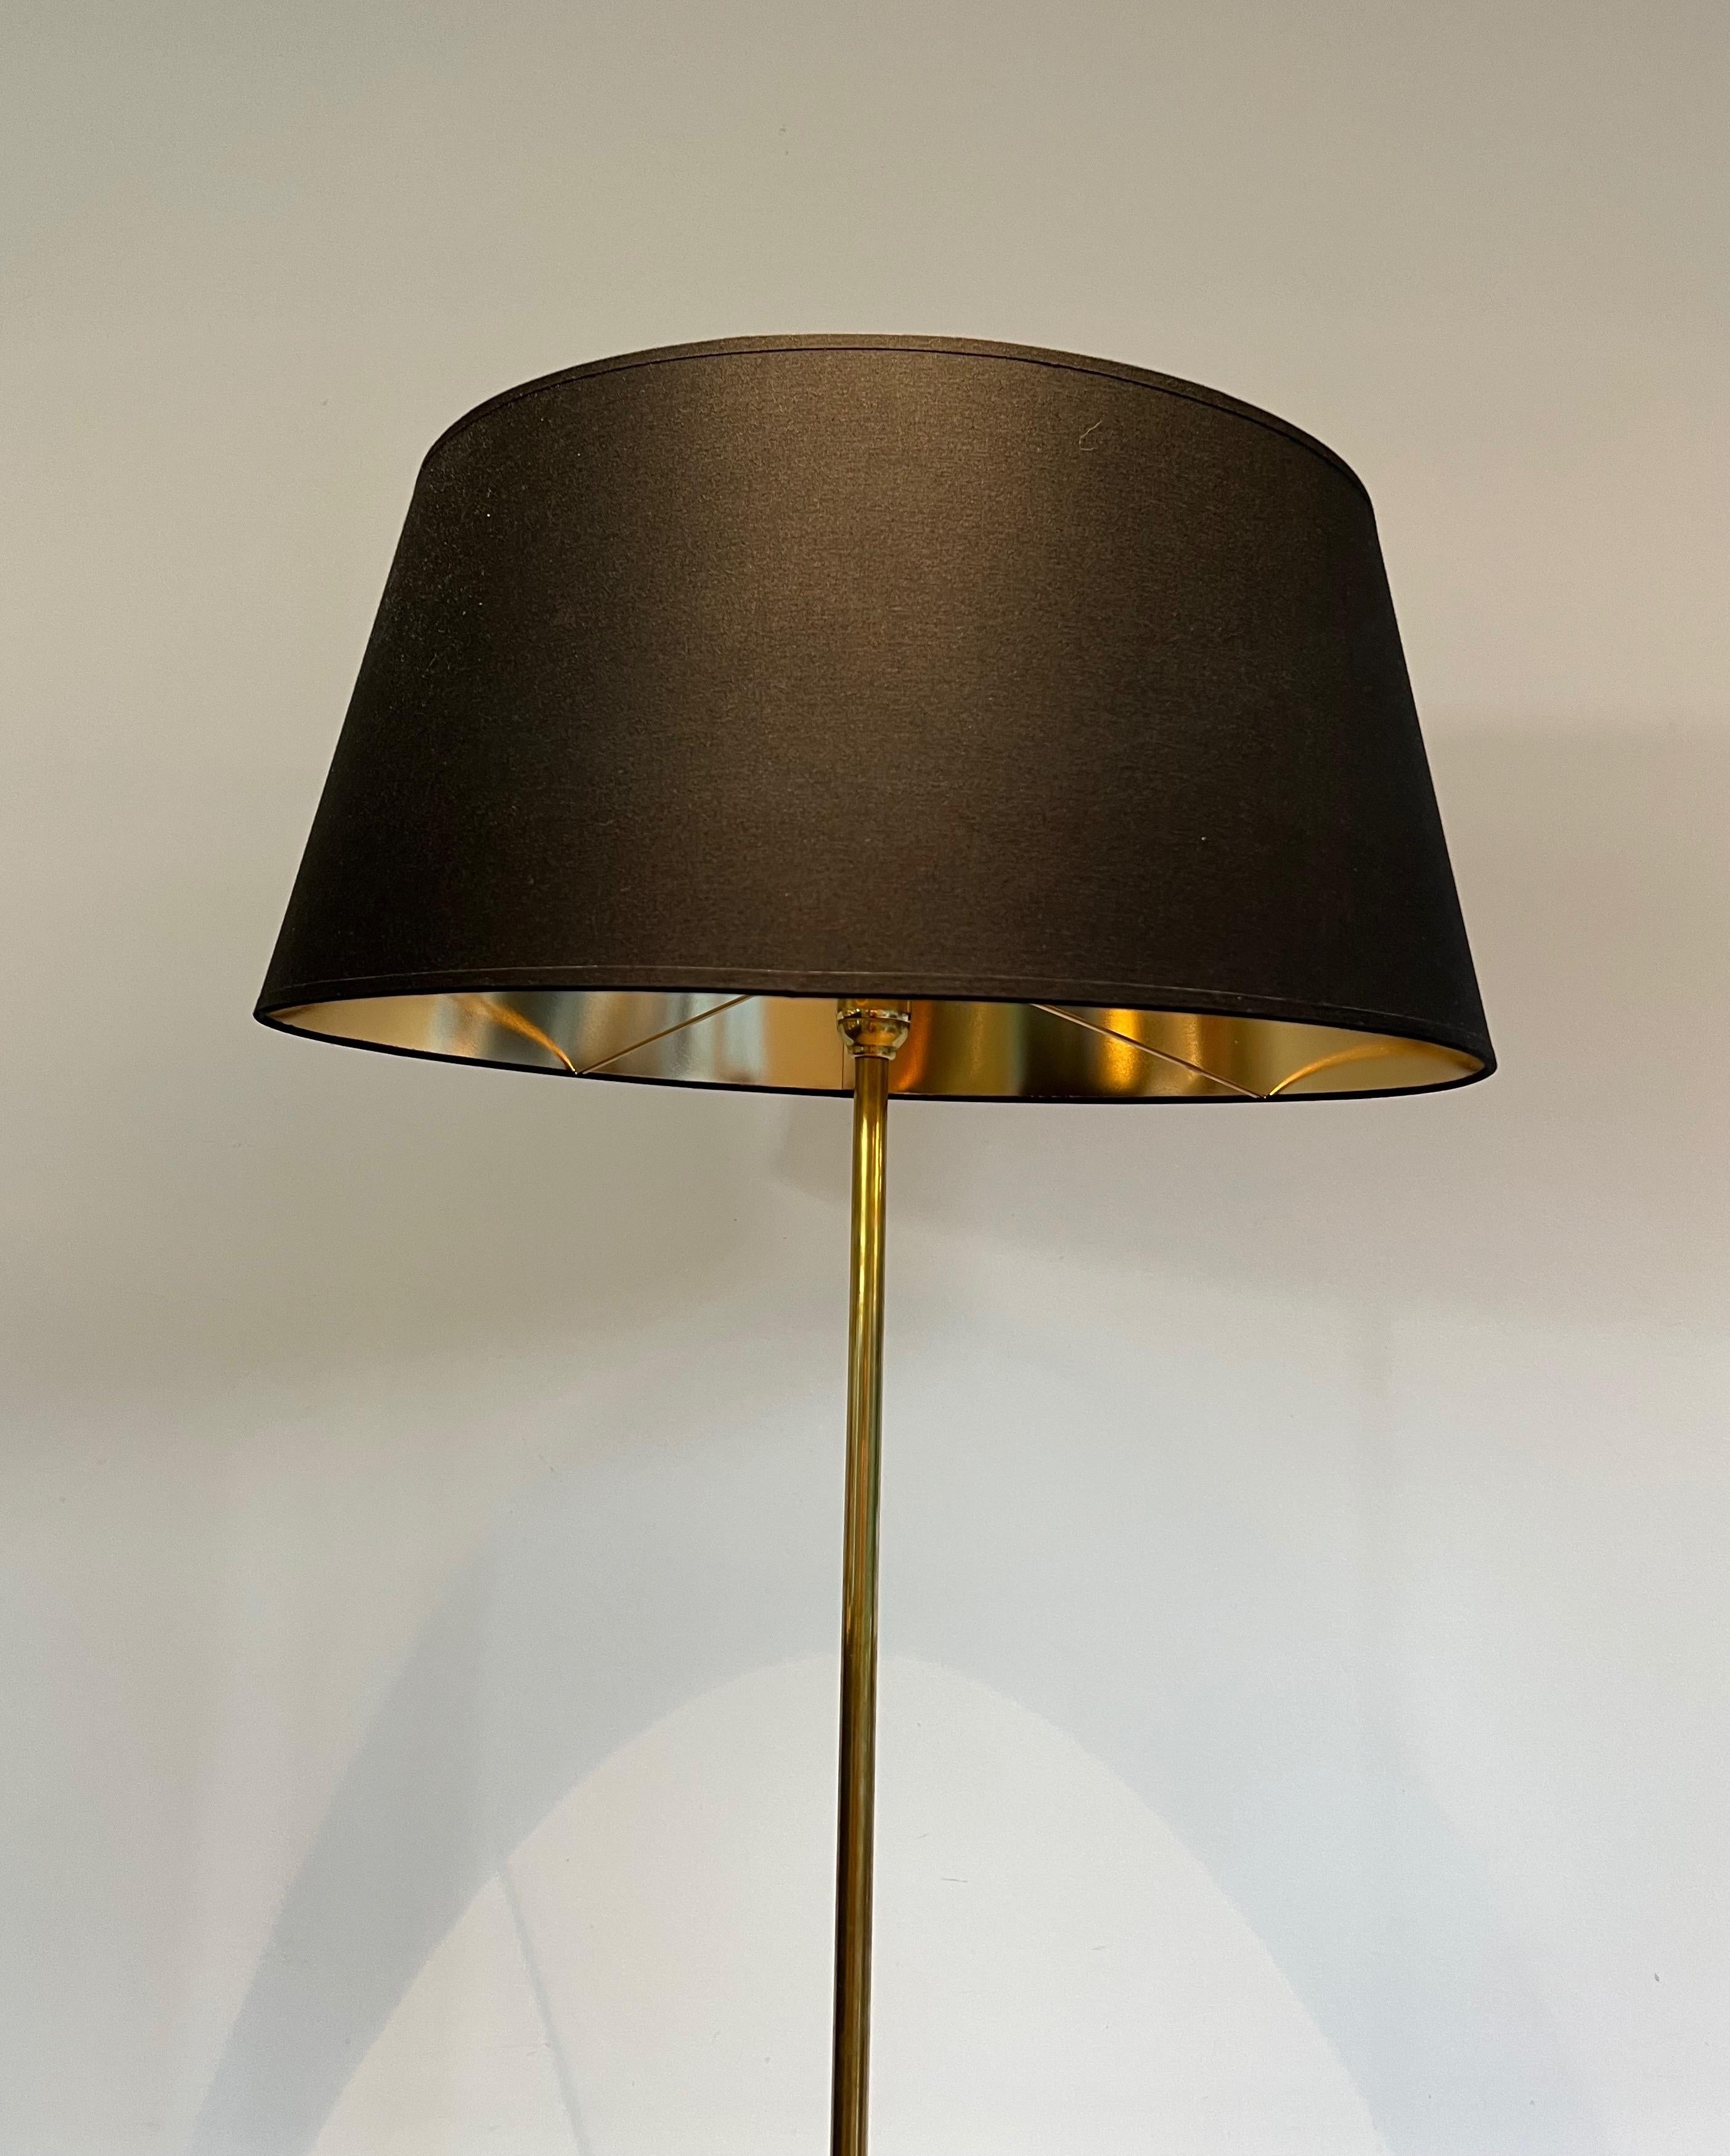 Mid-20th Century Neoclassical Style Brass and Wood Floor Lamp in the Style of Maison Jansen For Sale